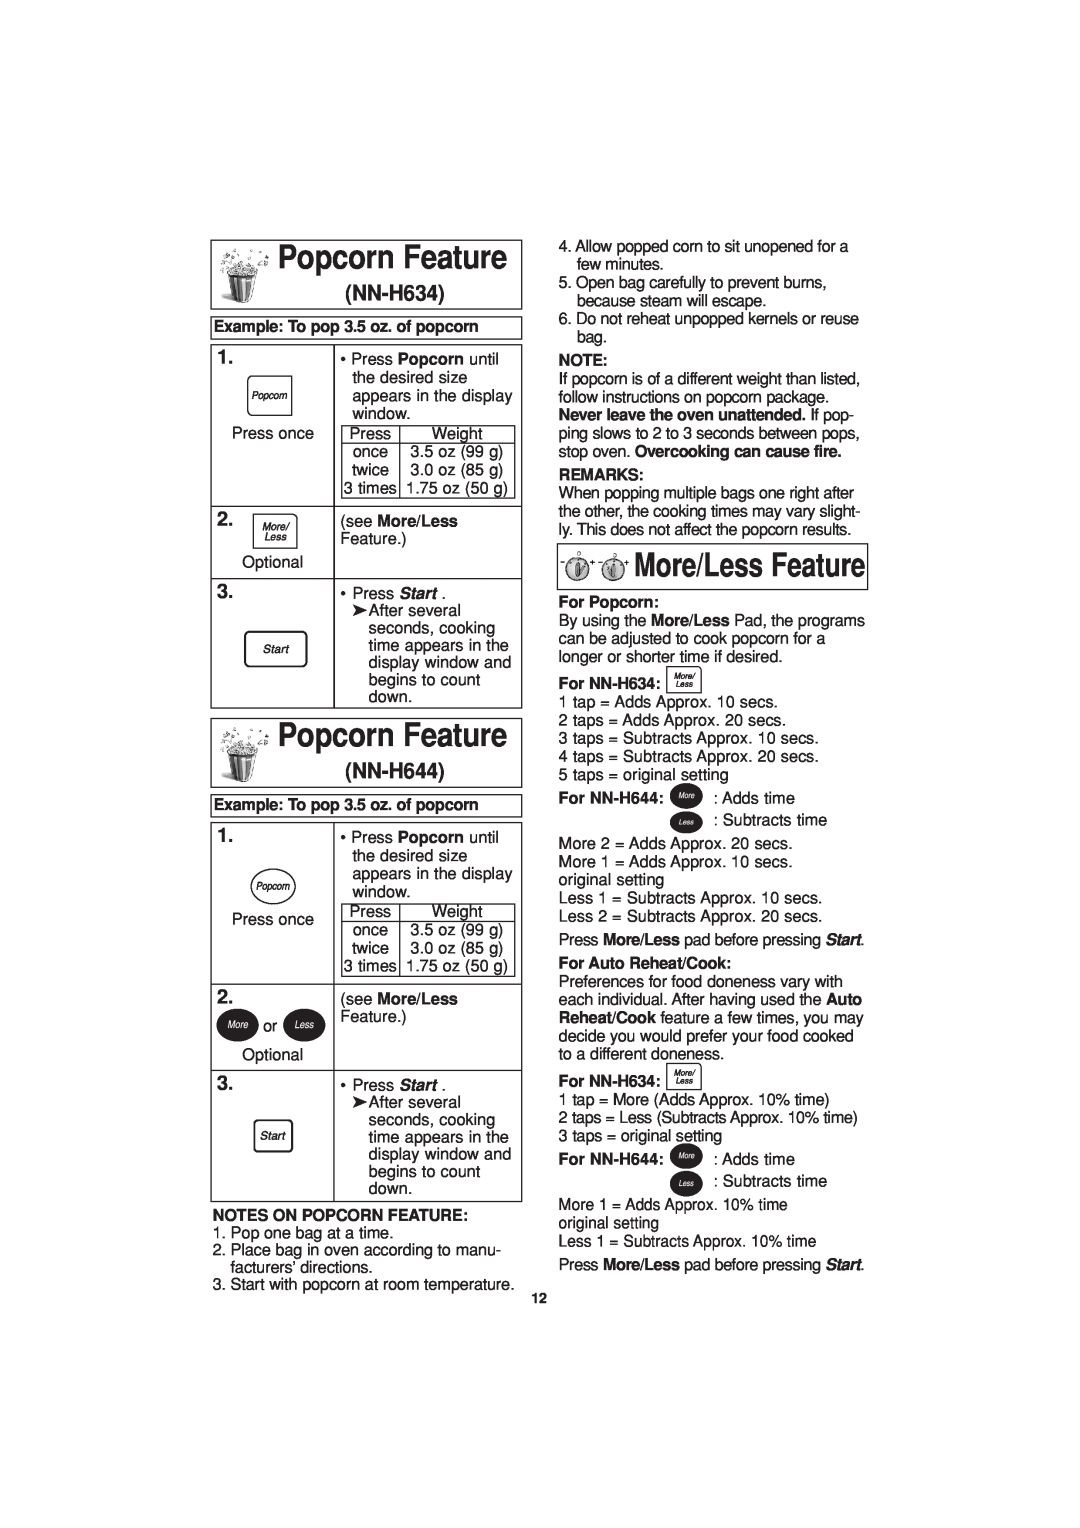 Panasonic NN-H644 important safety instructions Popcorn Feature, More/Less Feature, NN-H634 